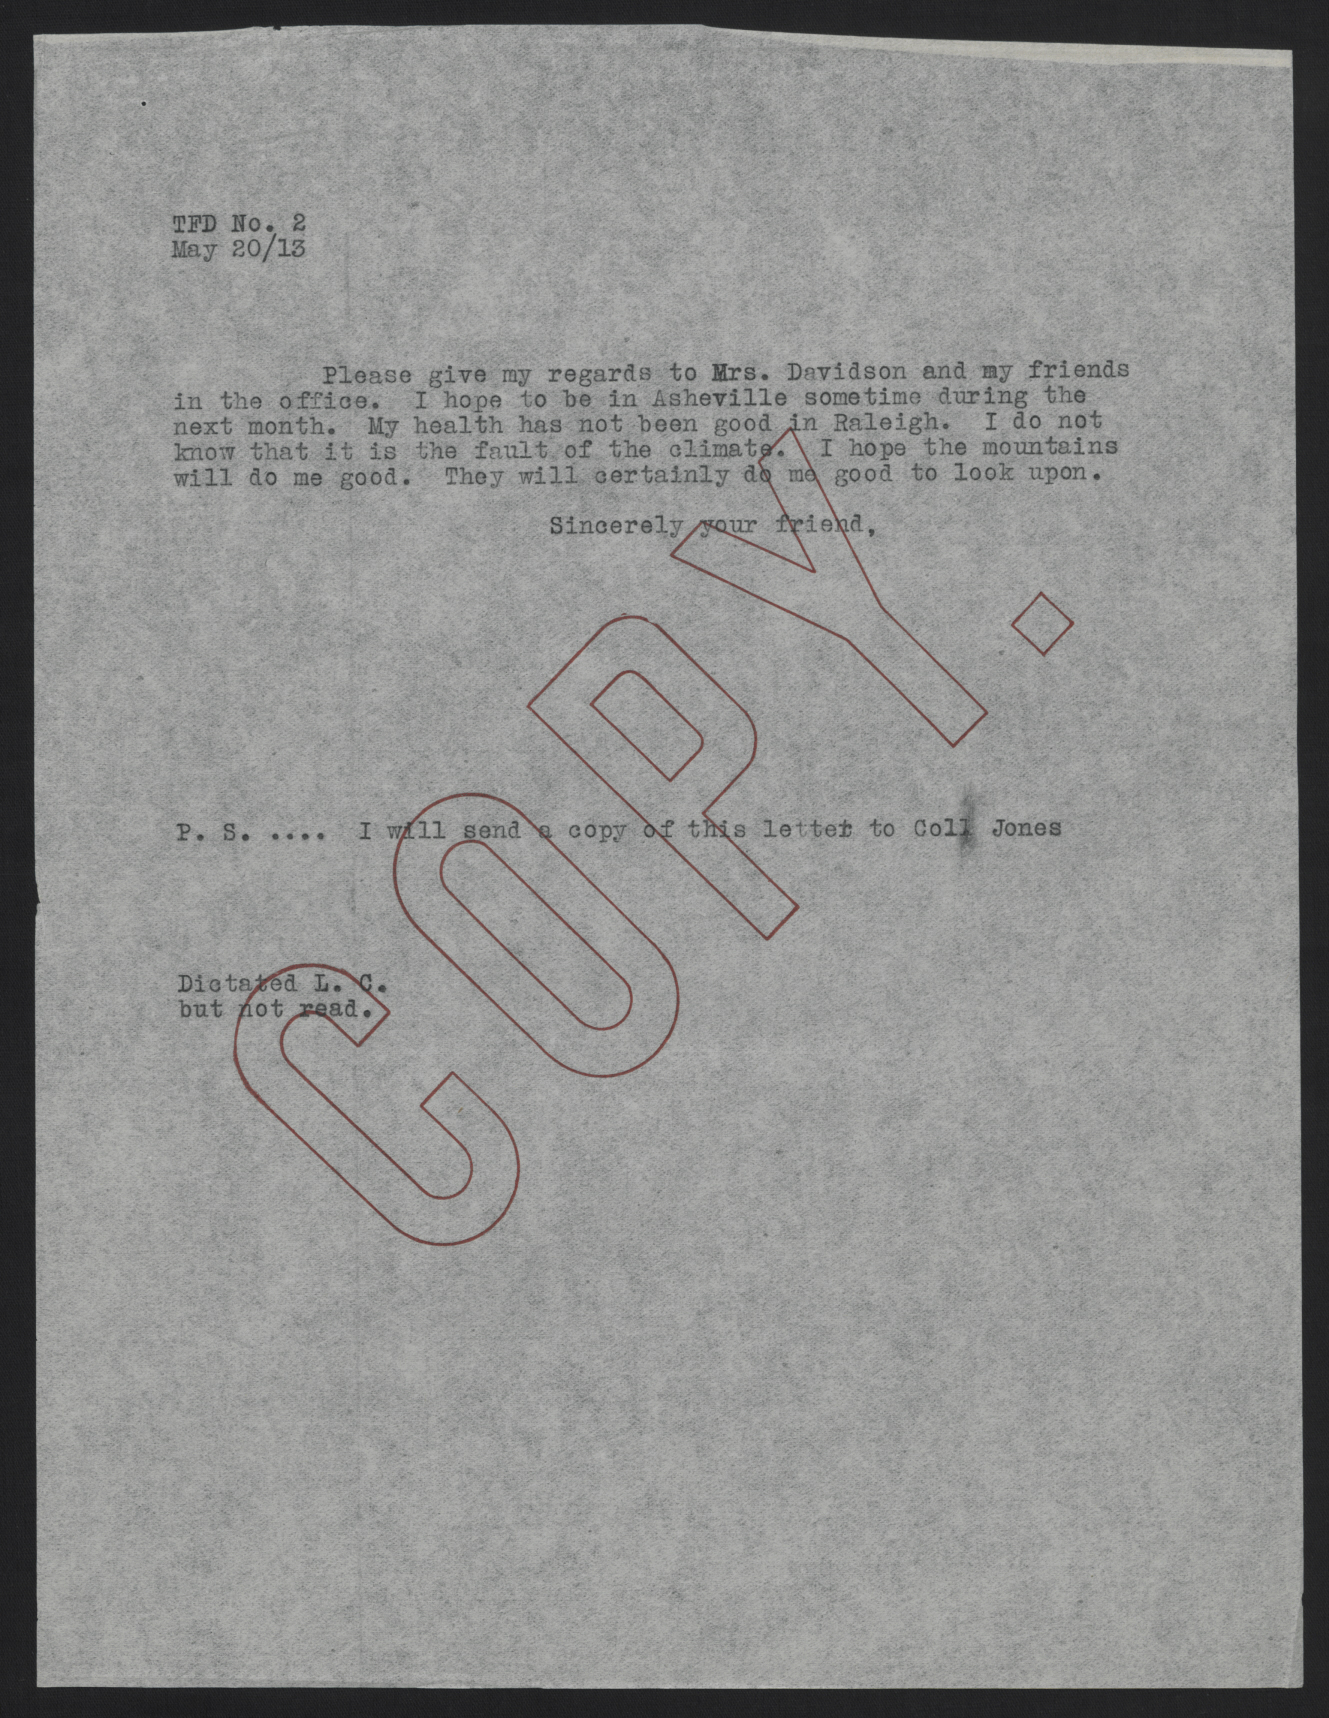 Letter from Craig to Davidson, May 20, 1913, page 2